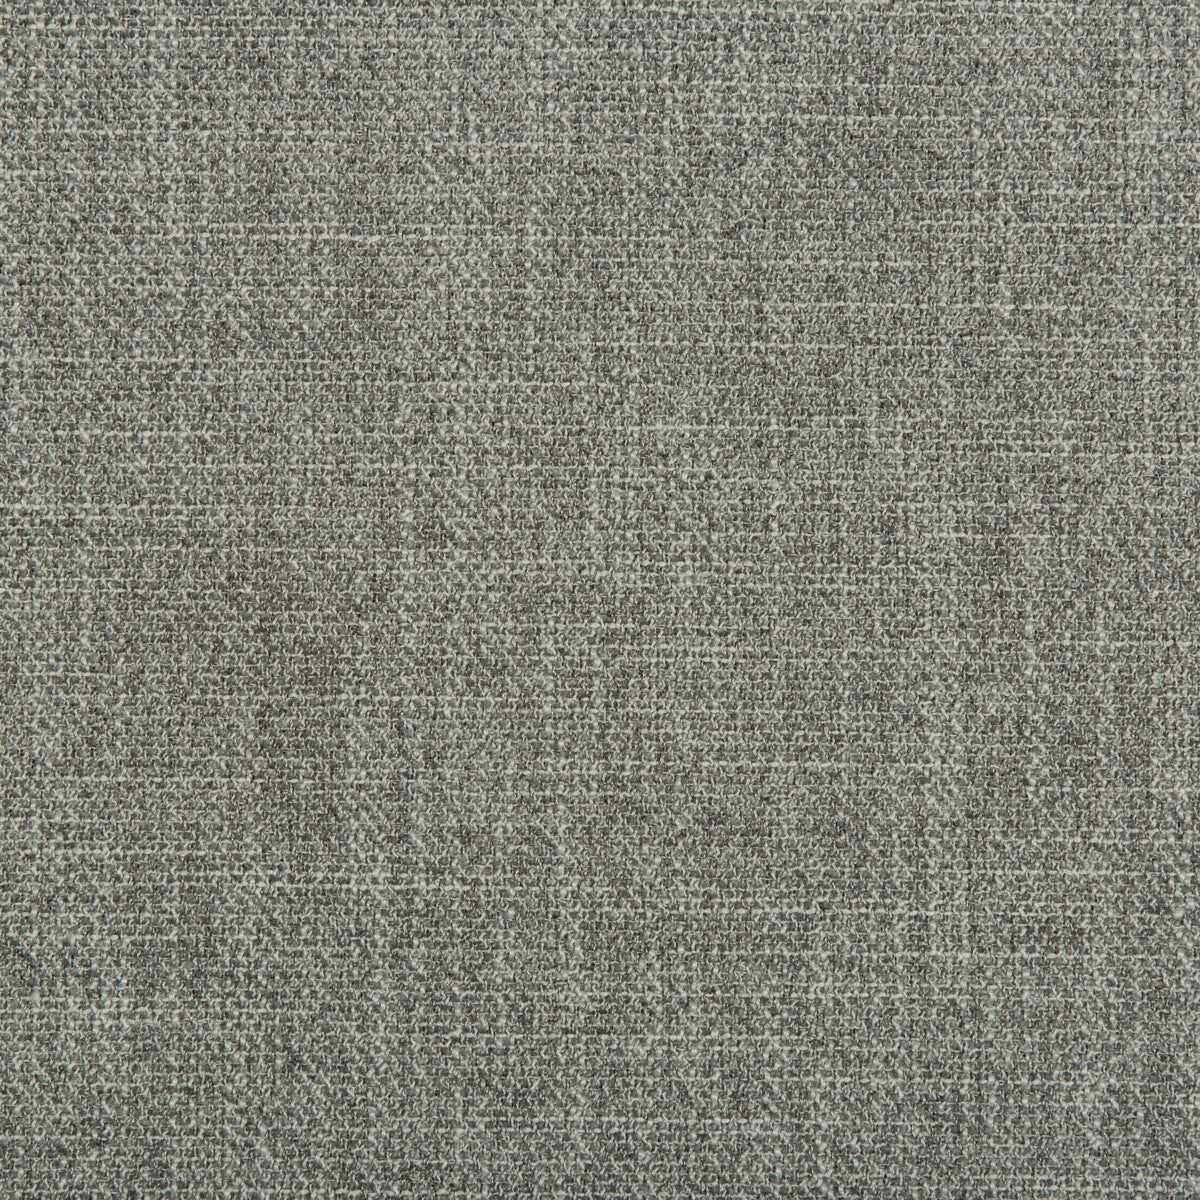 Kf Smt fabric - pattern 35390.1511.0 - by Kravet Smart in the Performance Crypton Home collection